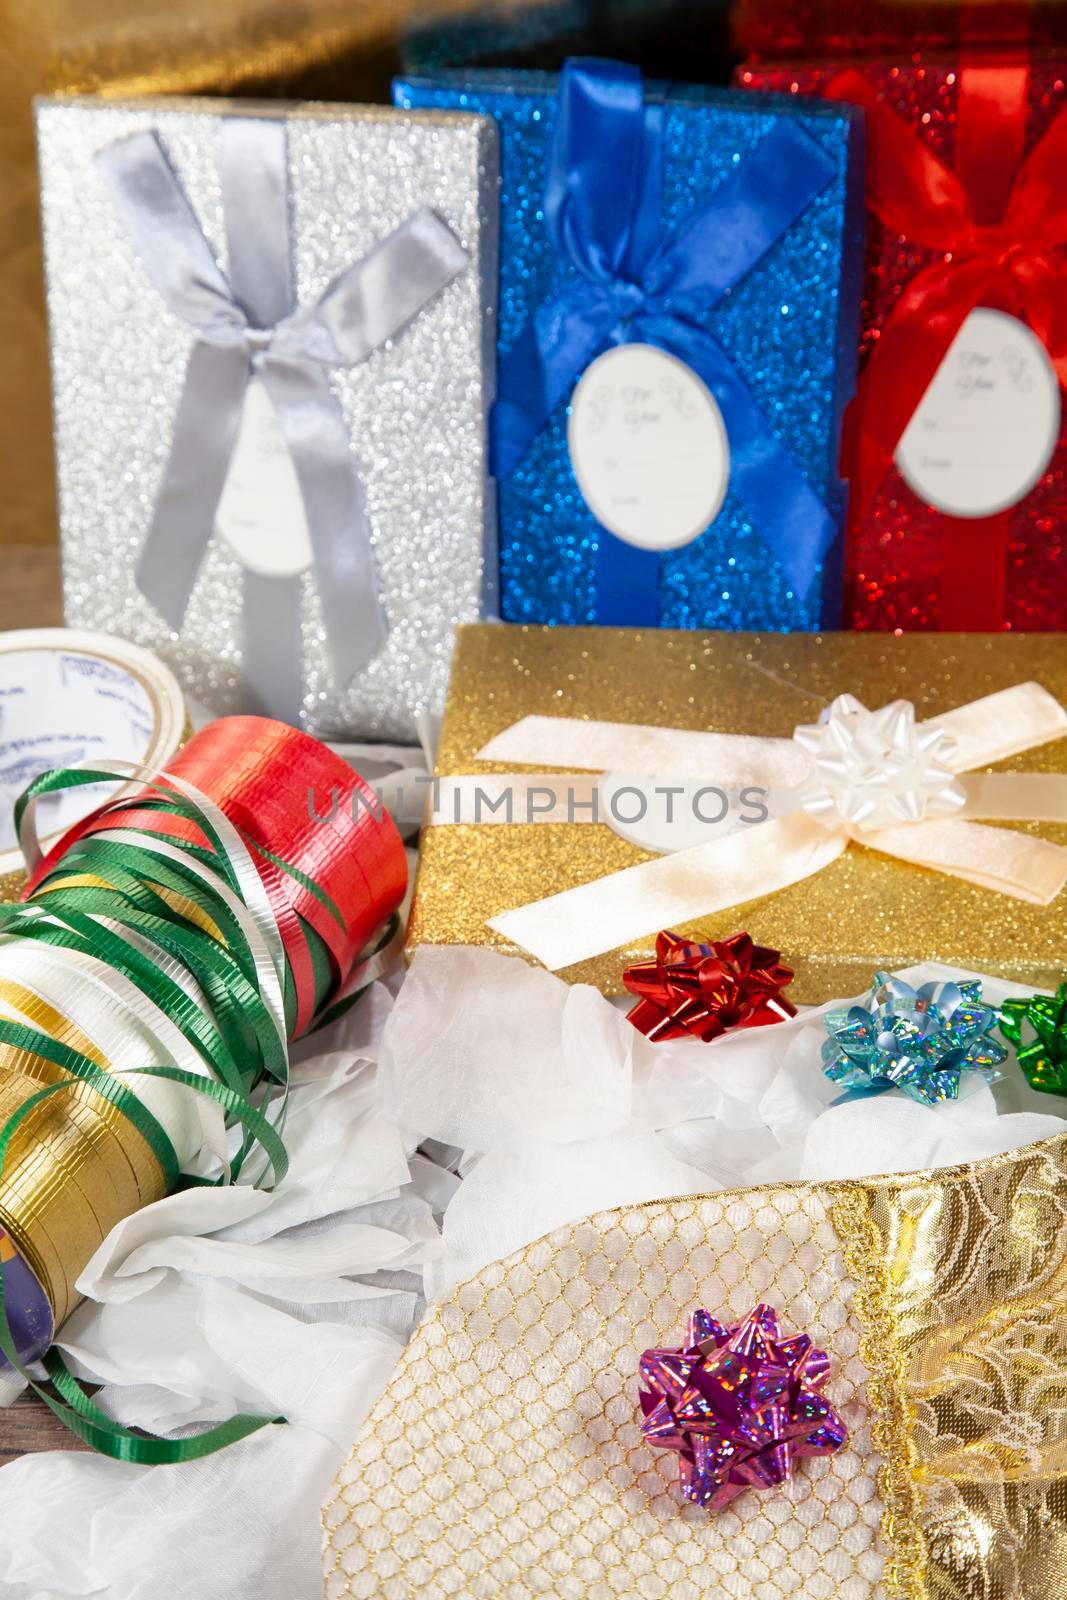 Golden gift box topped with a white bow in front of silver, blue, and red gift boxes and next to wrapping ribbon, red, blue, and green bows, and a golden stocking topped with a pinkish/purple bow